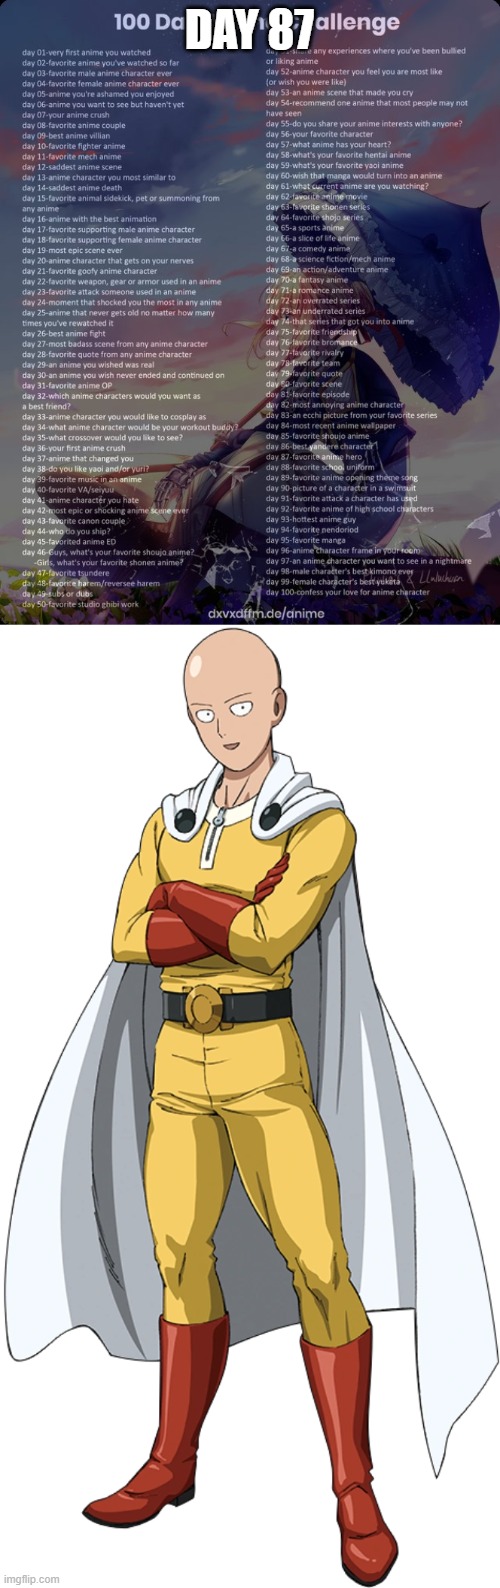 Day 87: Saitama (One Punch Man) | DAY 87 | image tagged in 100 day anime challenge | made w/ Imgflip meme maker